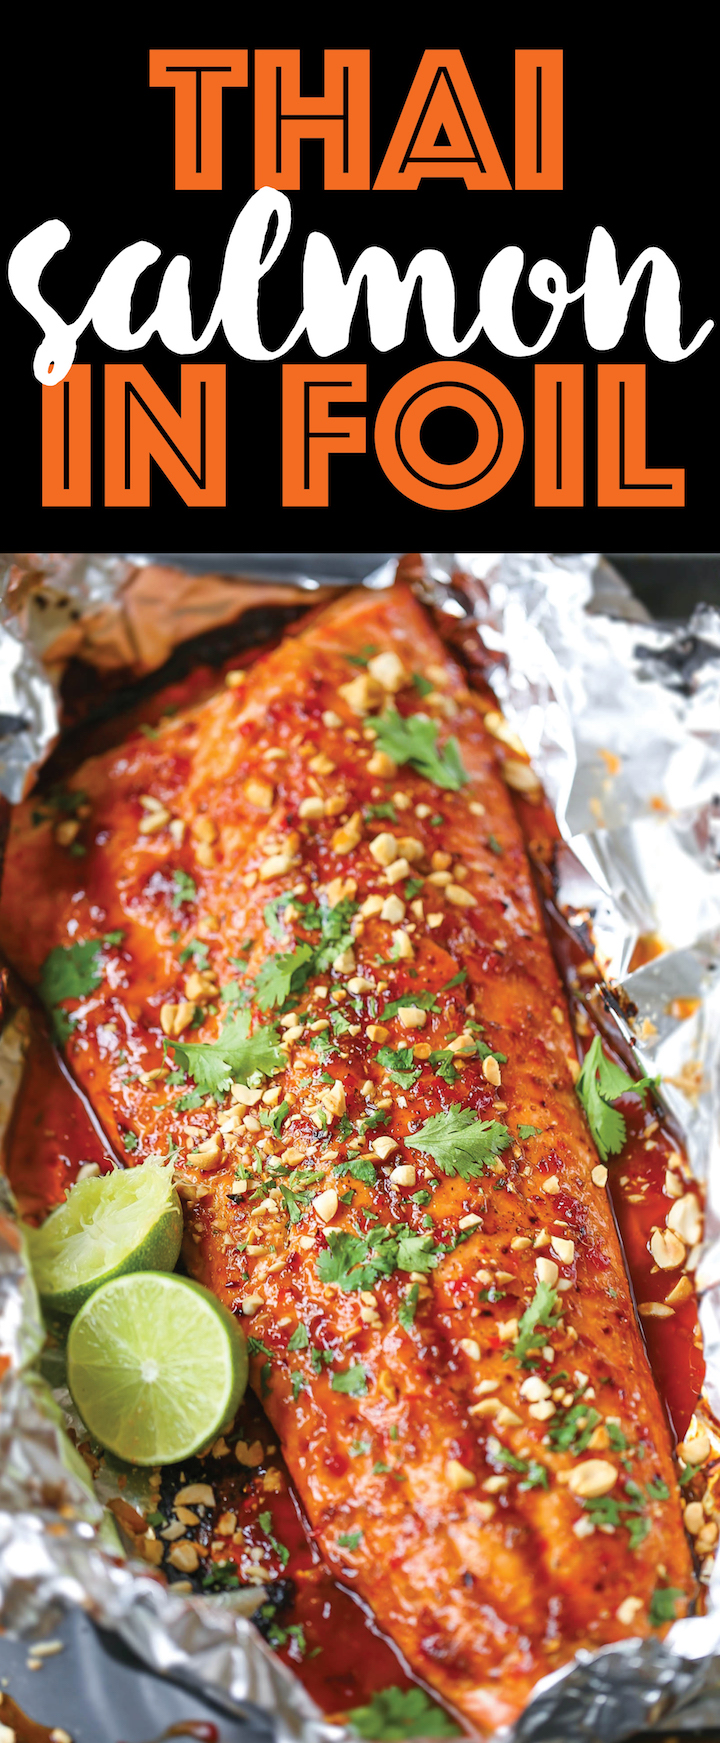 Thai Salmon in Foil - The flavors are sealed right into a foil packet with no clean up! The salmon comes out so tender/juicy. Sure to be a family favorite!